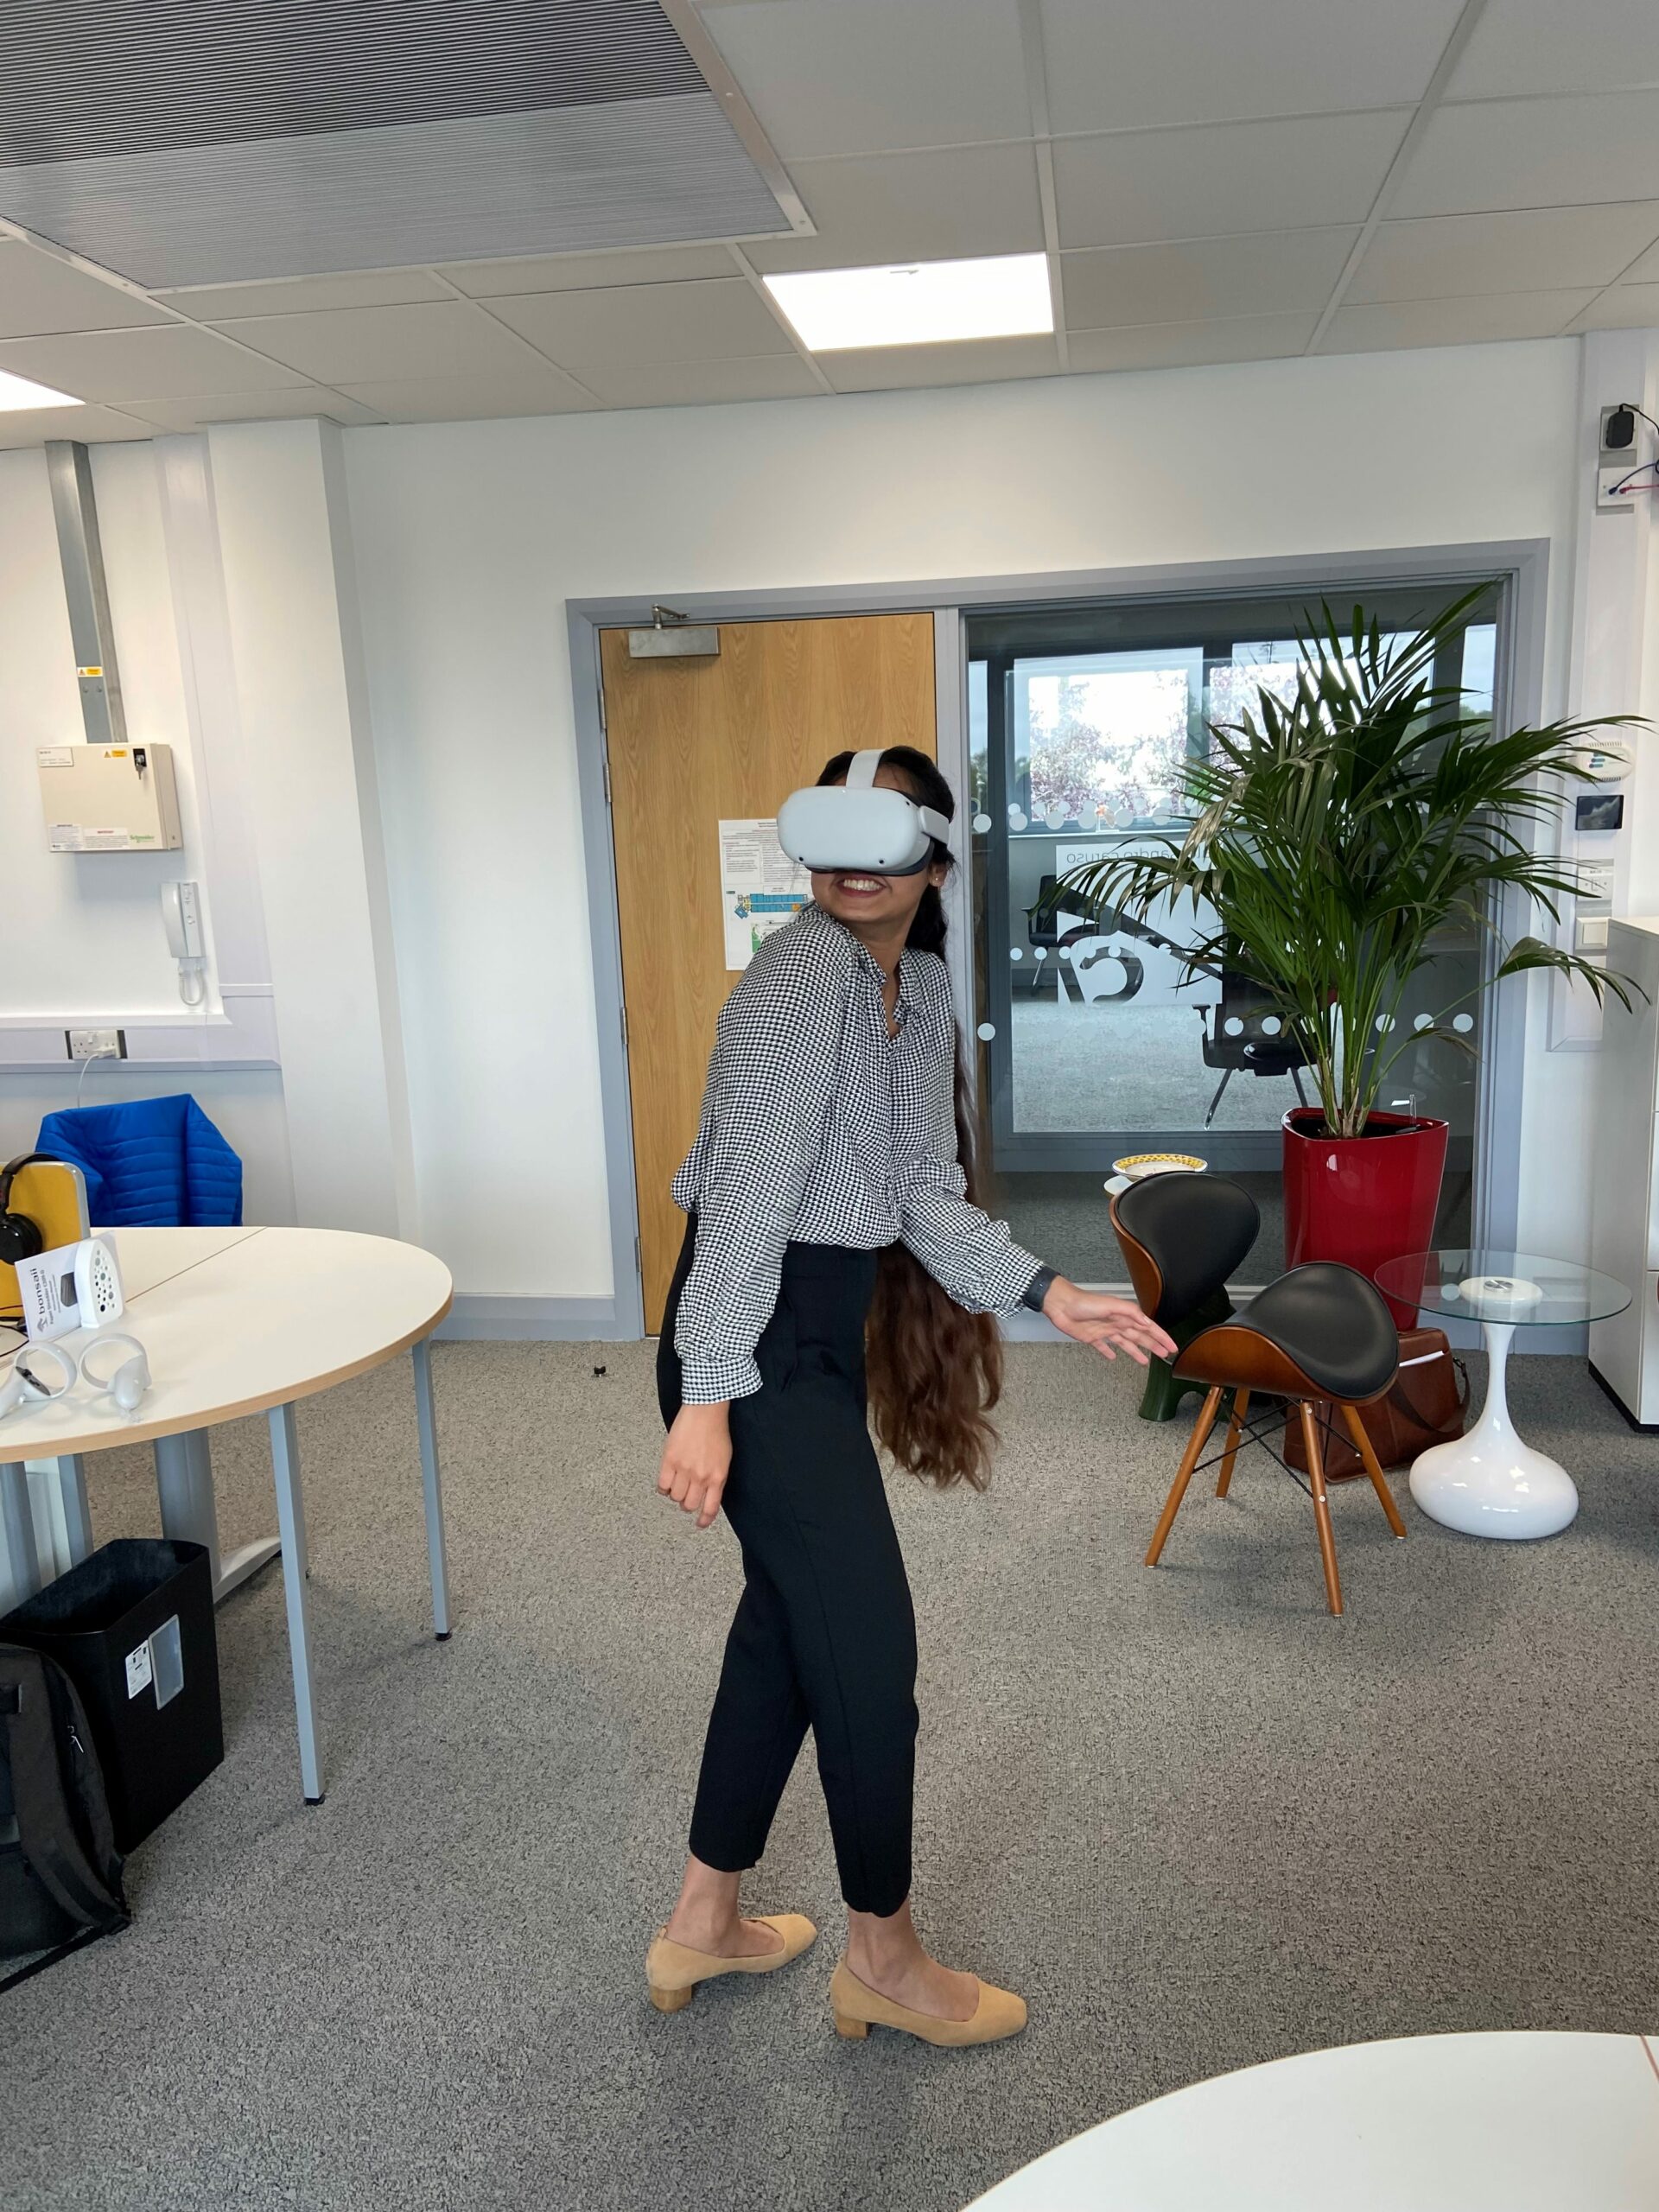 Alessandro Caruso Architects staff member using virtual reality headset and software